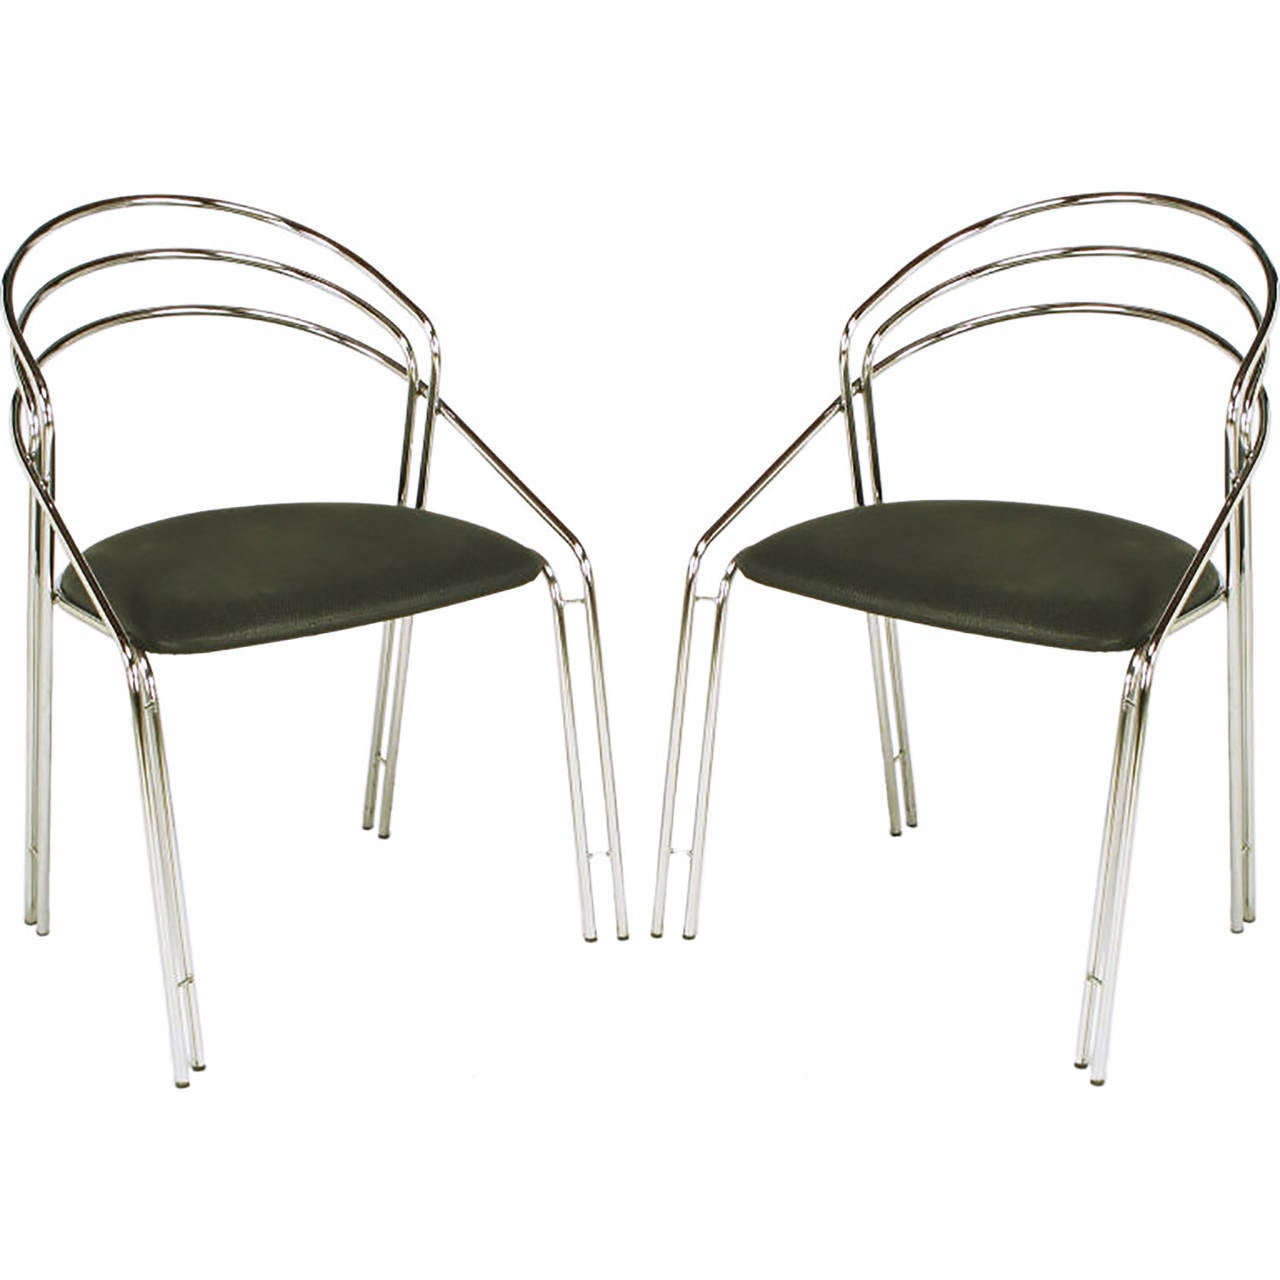 Pair of chromed and bent steel Postmodern Italian side chairs. Multiple bars of chromed steel with thin chromed steel spacers. Each bar is significant to the design of the chair, making double bar legs with connections to the seat and the back.